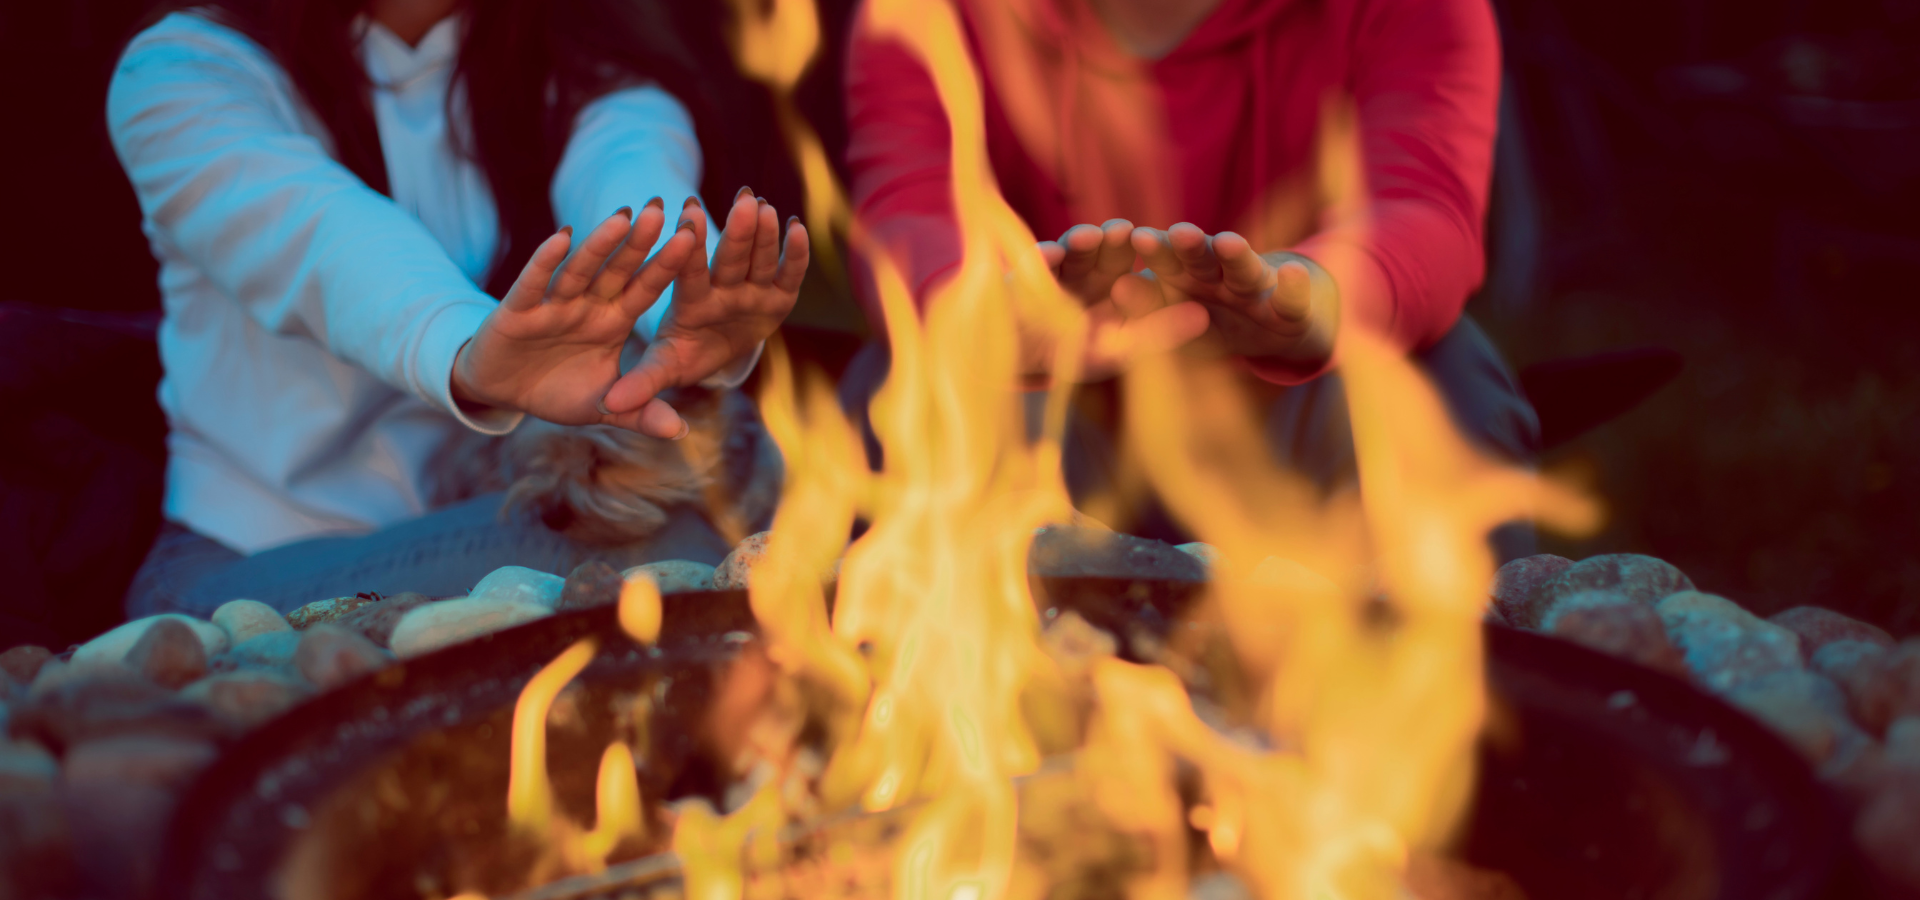 A man and a woman warming their hands on a fire